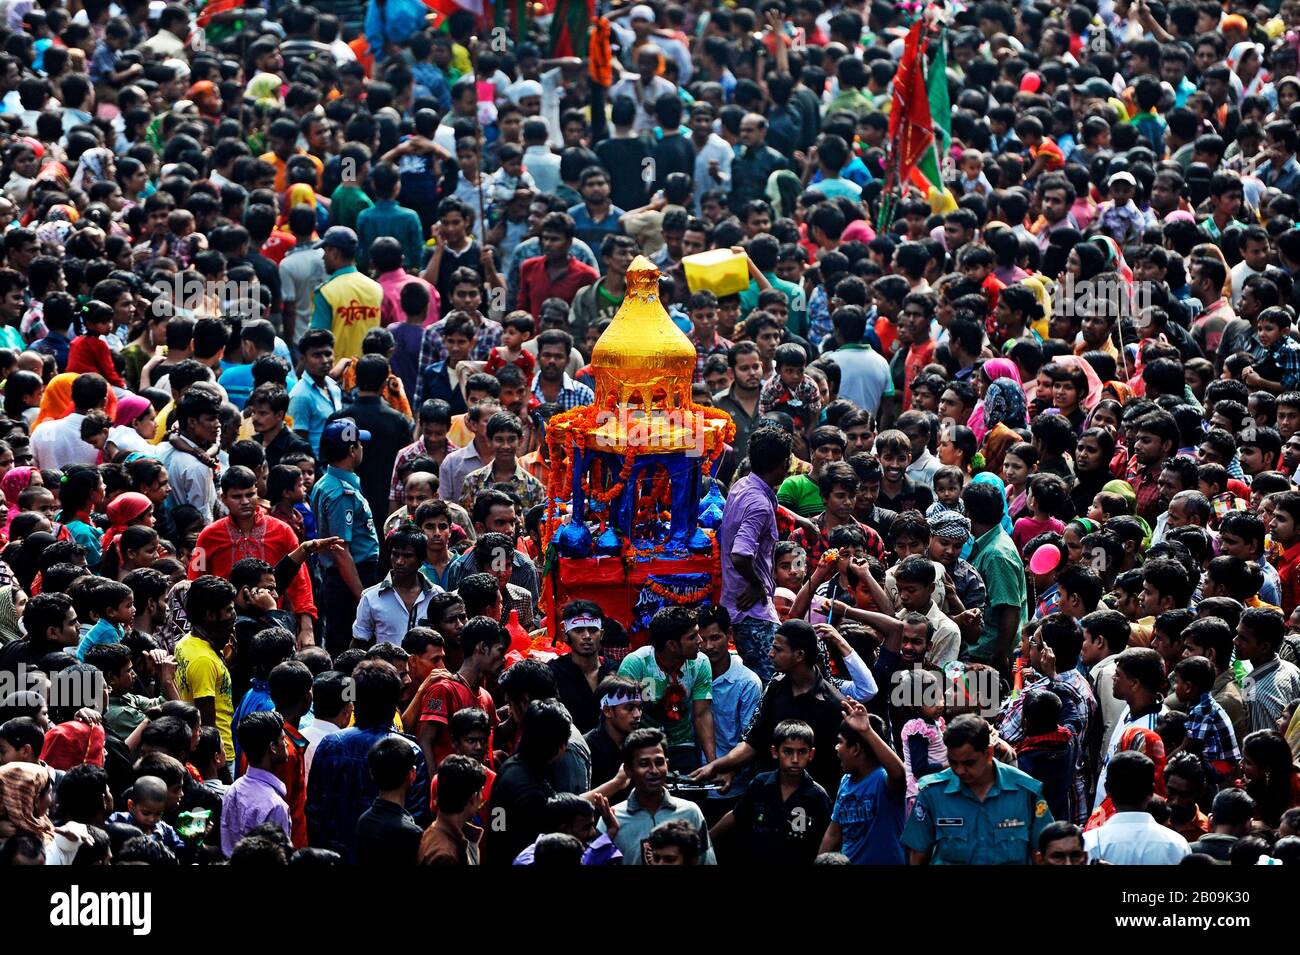 Thousands of Shia Muslims carryout a mourning procession of the holy Ashura on the 10th day of the holy month of Muharram. Ashura marks the martyrdom of Hazrat Imam Hassan and Hussain the grand sons of Prophet Muhammad, who were killed in a battle. Dhaka, Bangladesh. December 6, 2011. Stock Photo